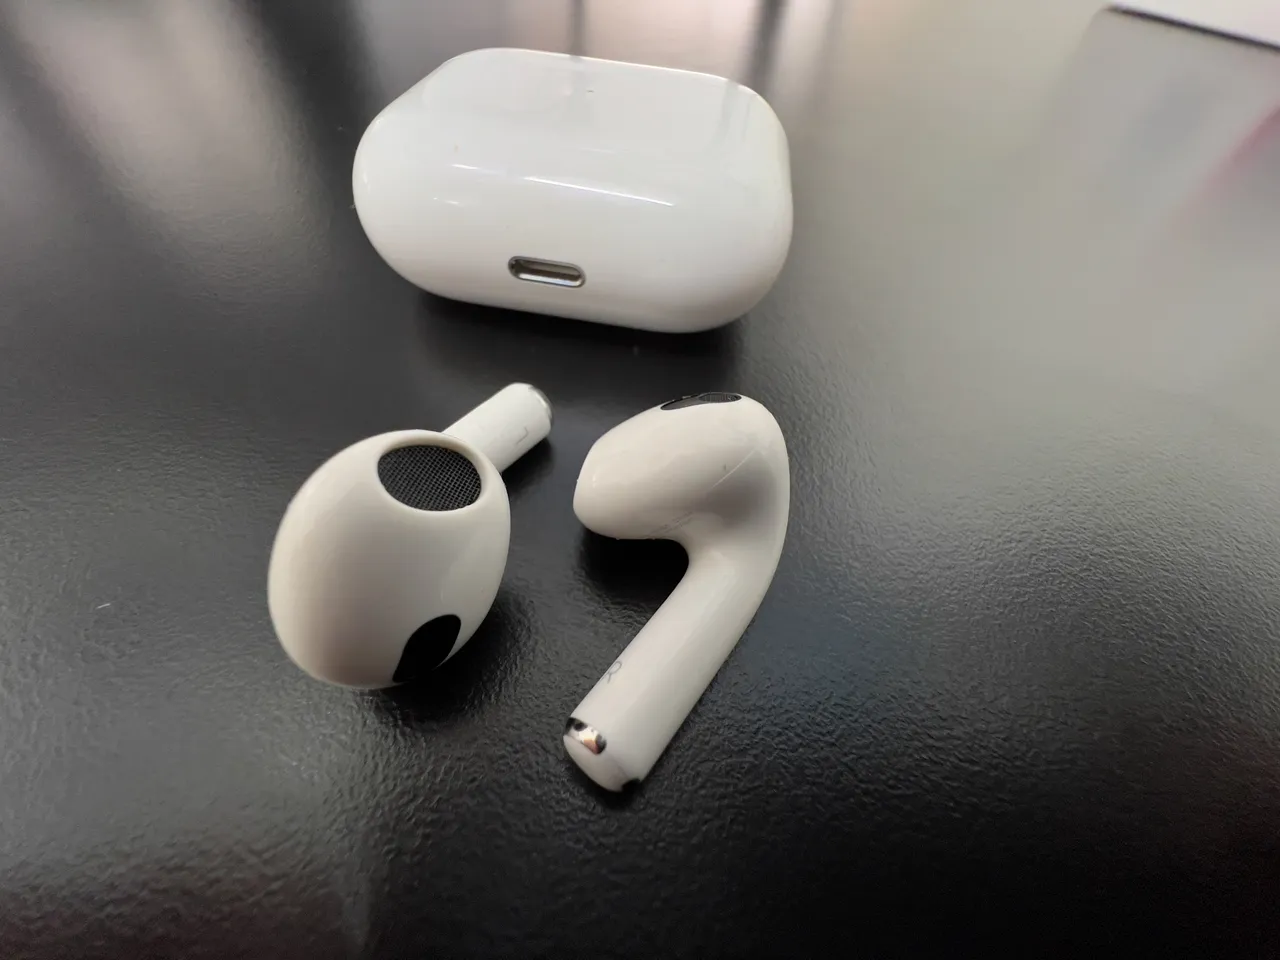 Why Does One AirPod Charge Drops Faster Than the Other? Explained